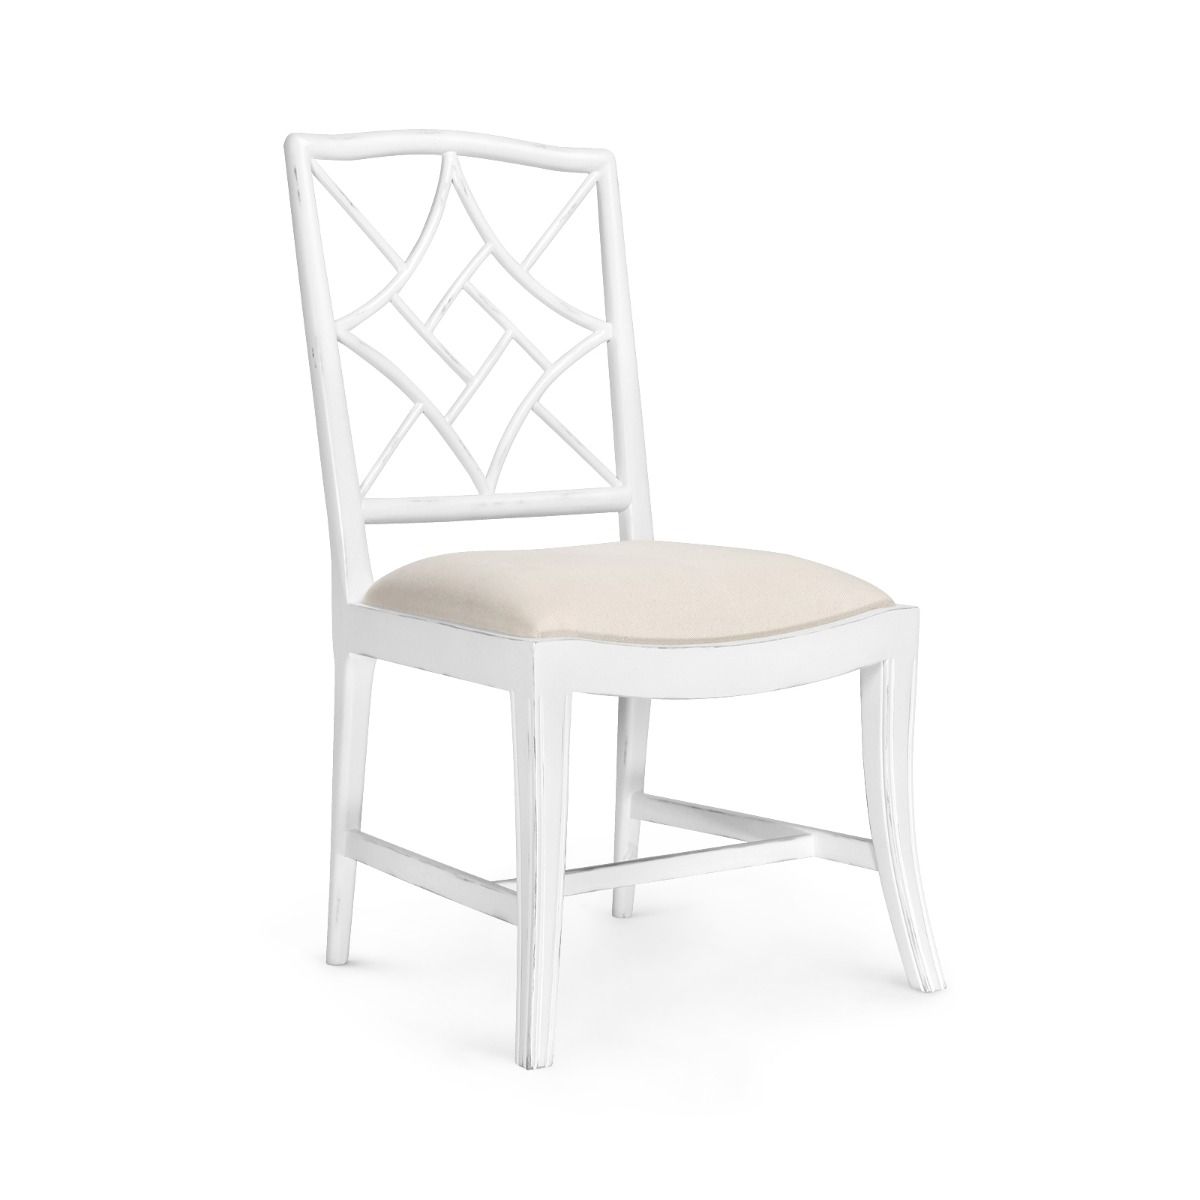 Load image into Gallery viewer, Evelyn Side Chair, White Dining Chair Bungalow 5     Four Hands, Burke Decor, Mid Century Modern Furniture, Old Bones Furniture Company, Old Bones Co, Modern Mid Century, Designer Furniture, https://www.oldbonesco.com/
